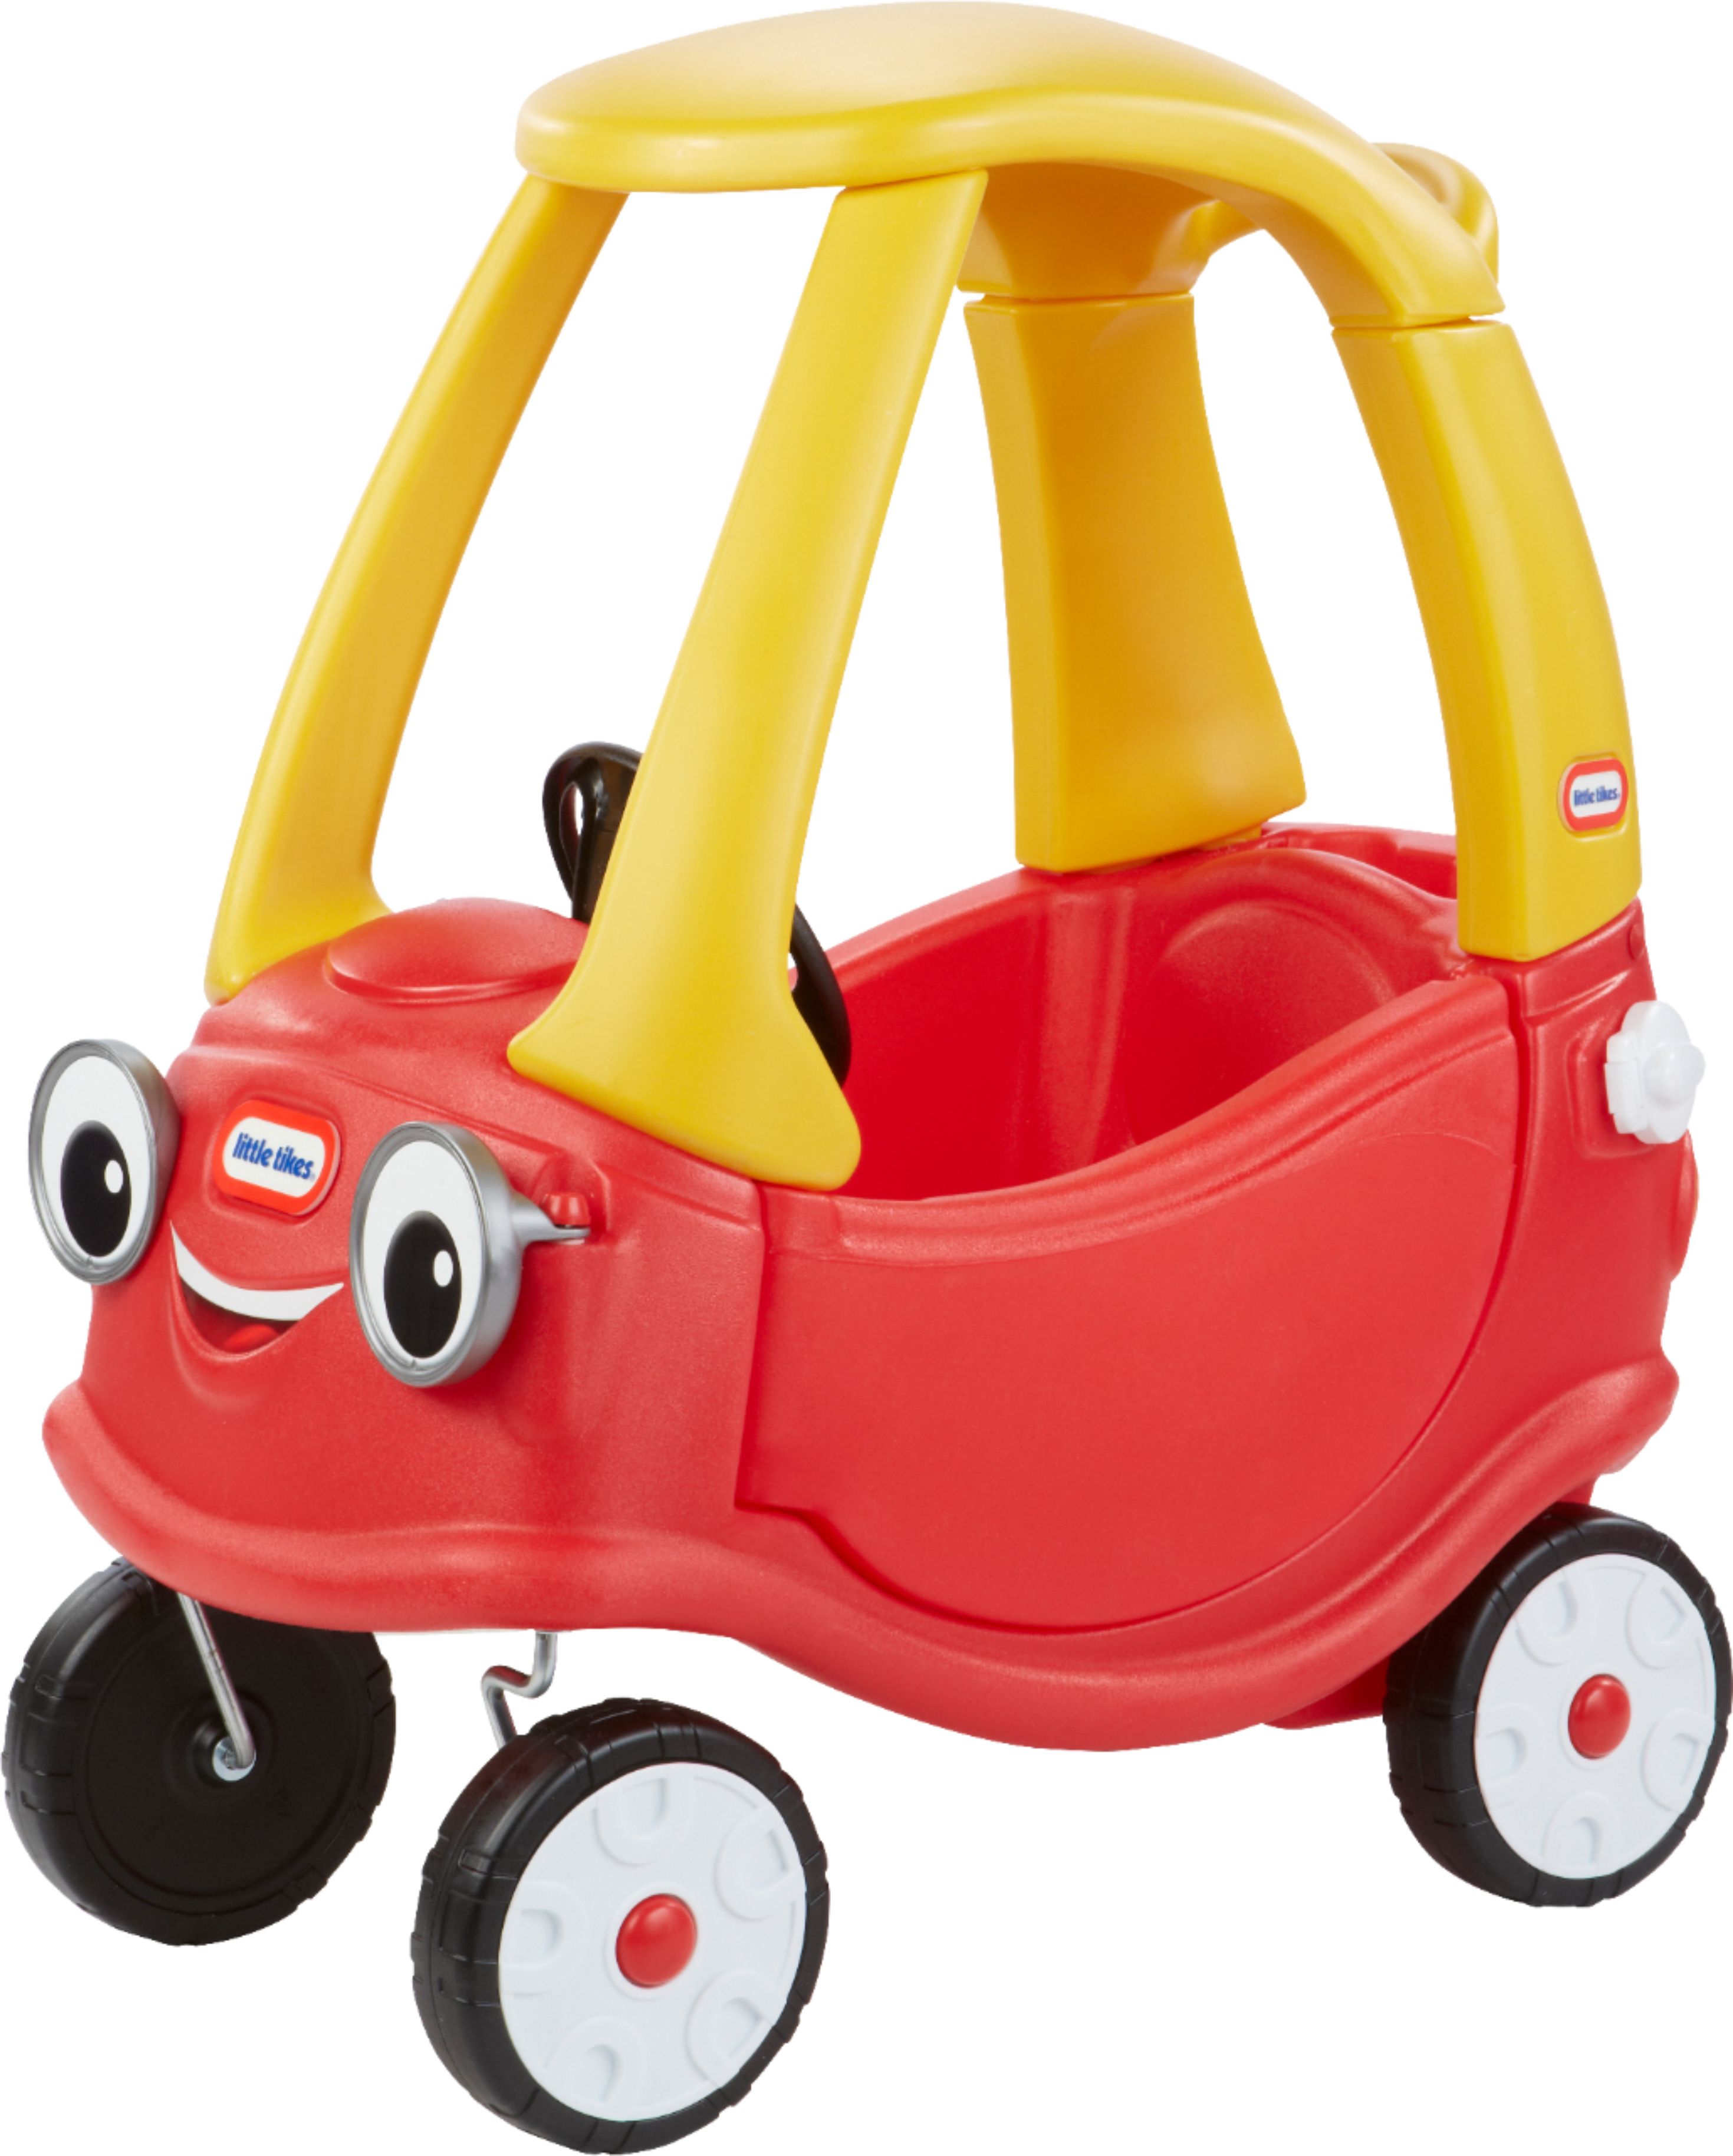 Little Tikes Cozy Coupe Yellow And Red 642302mp Best Buy